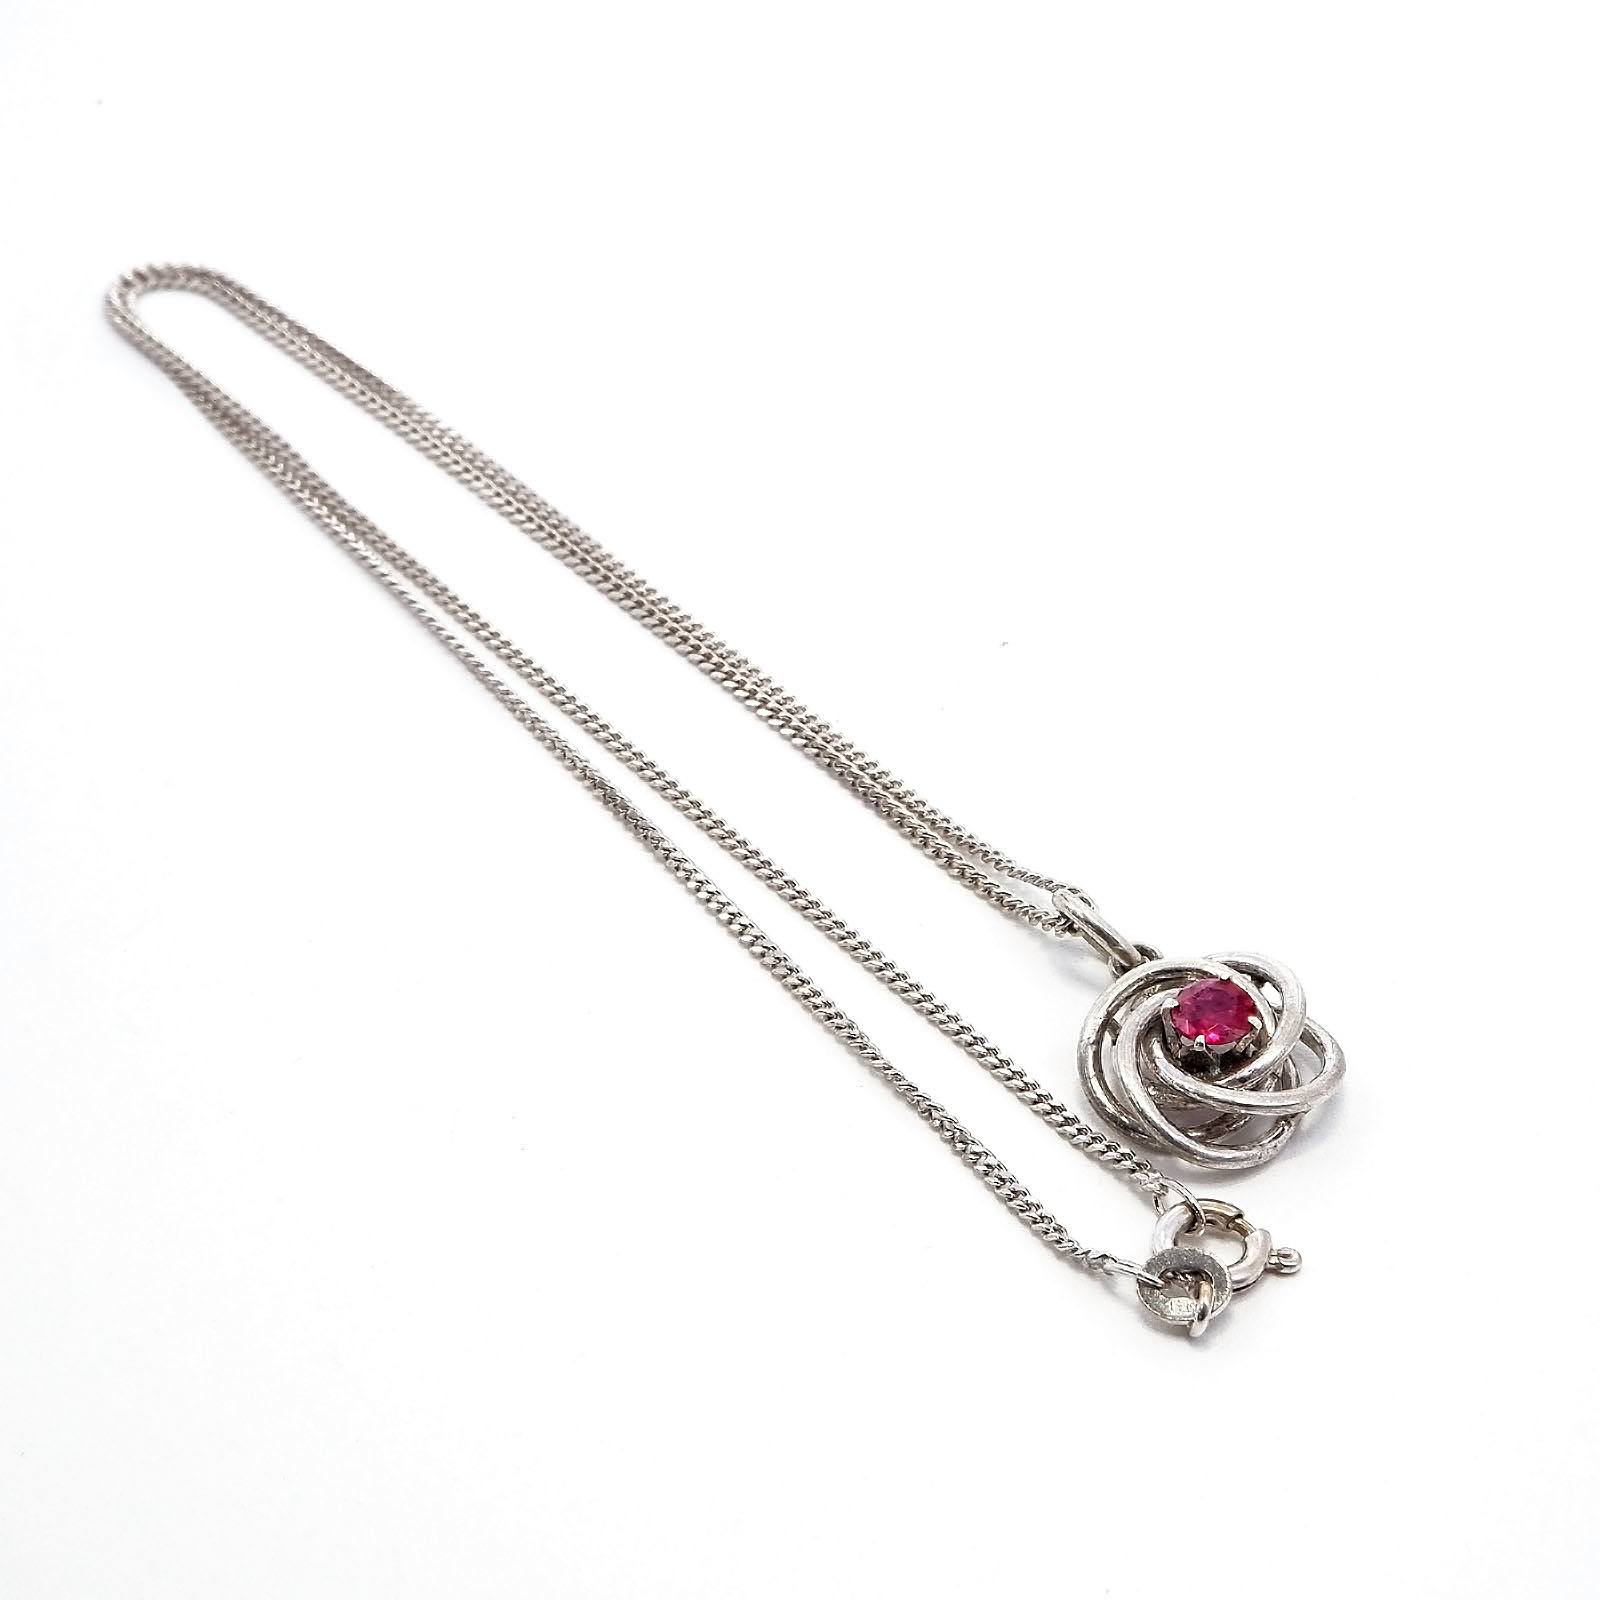 '18ct White Gold Pendant, Swirl Design with Brown Facetted Ruby on a Fine Filed Curb Link Chain, 4.3'